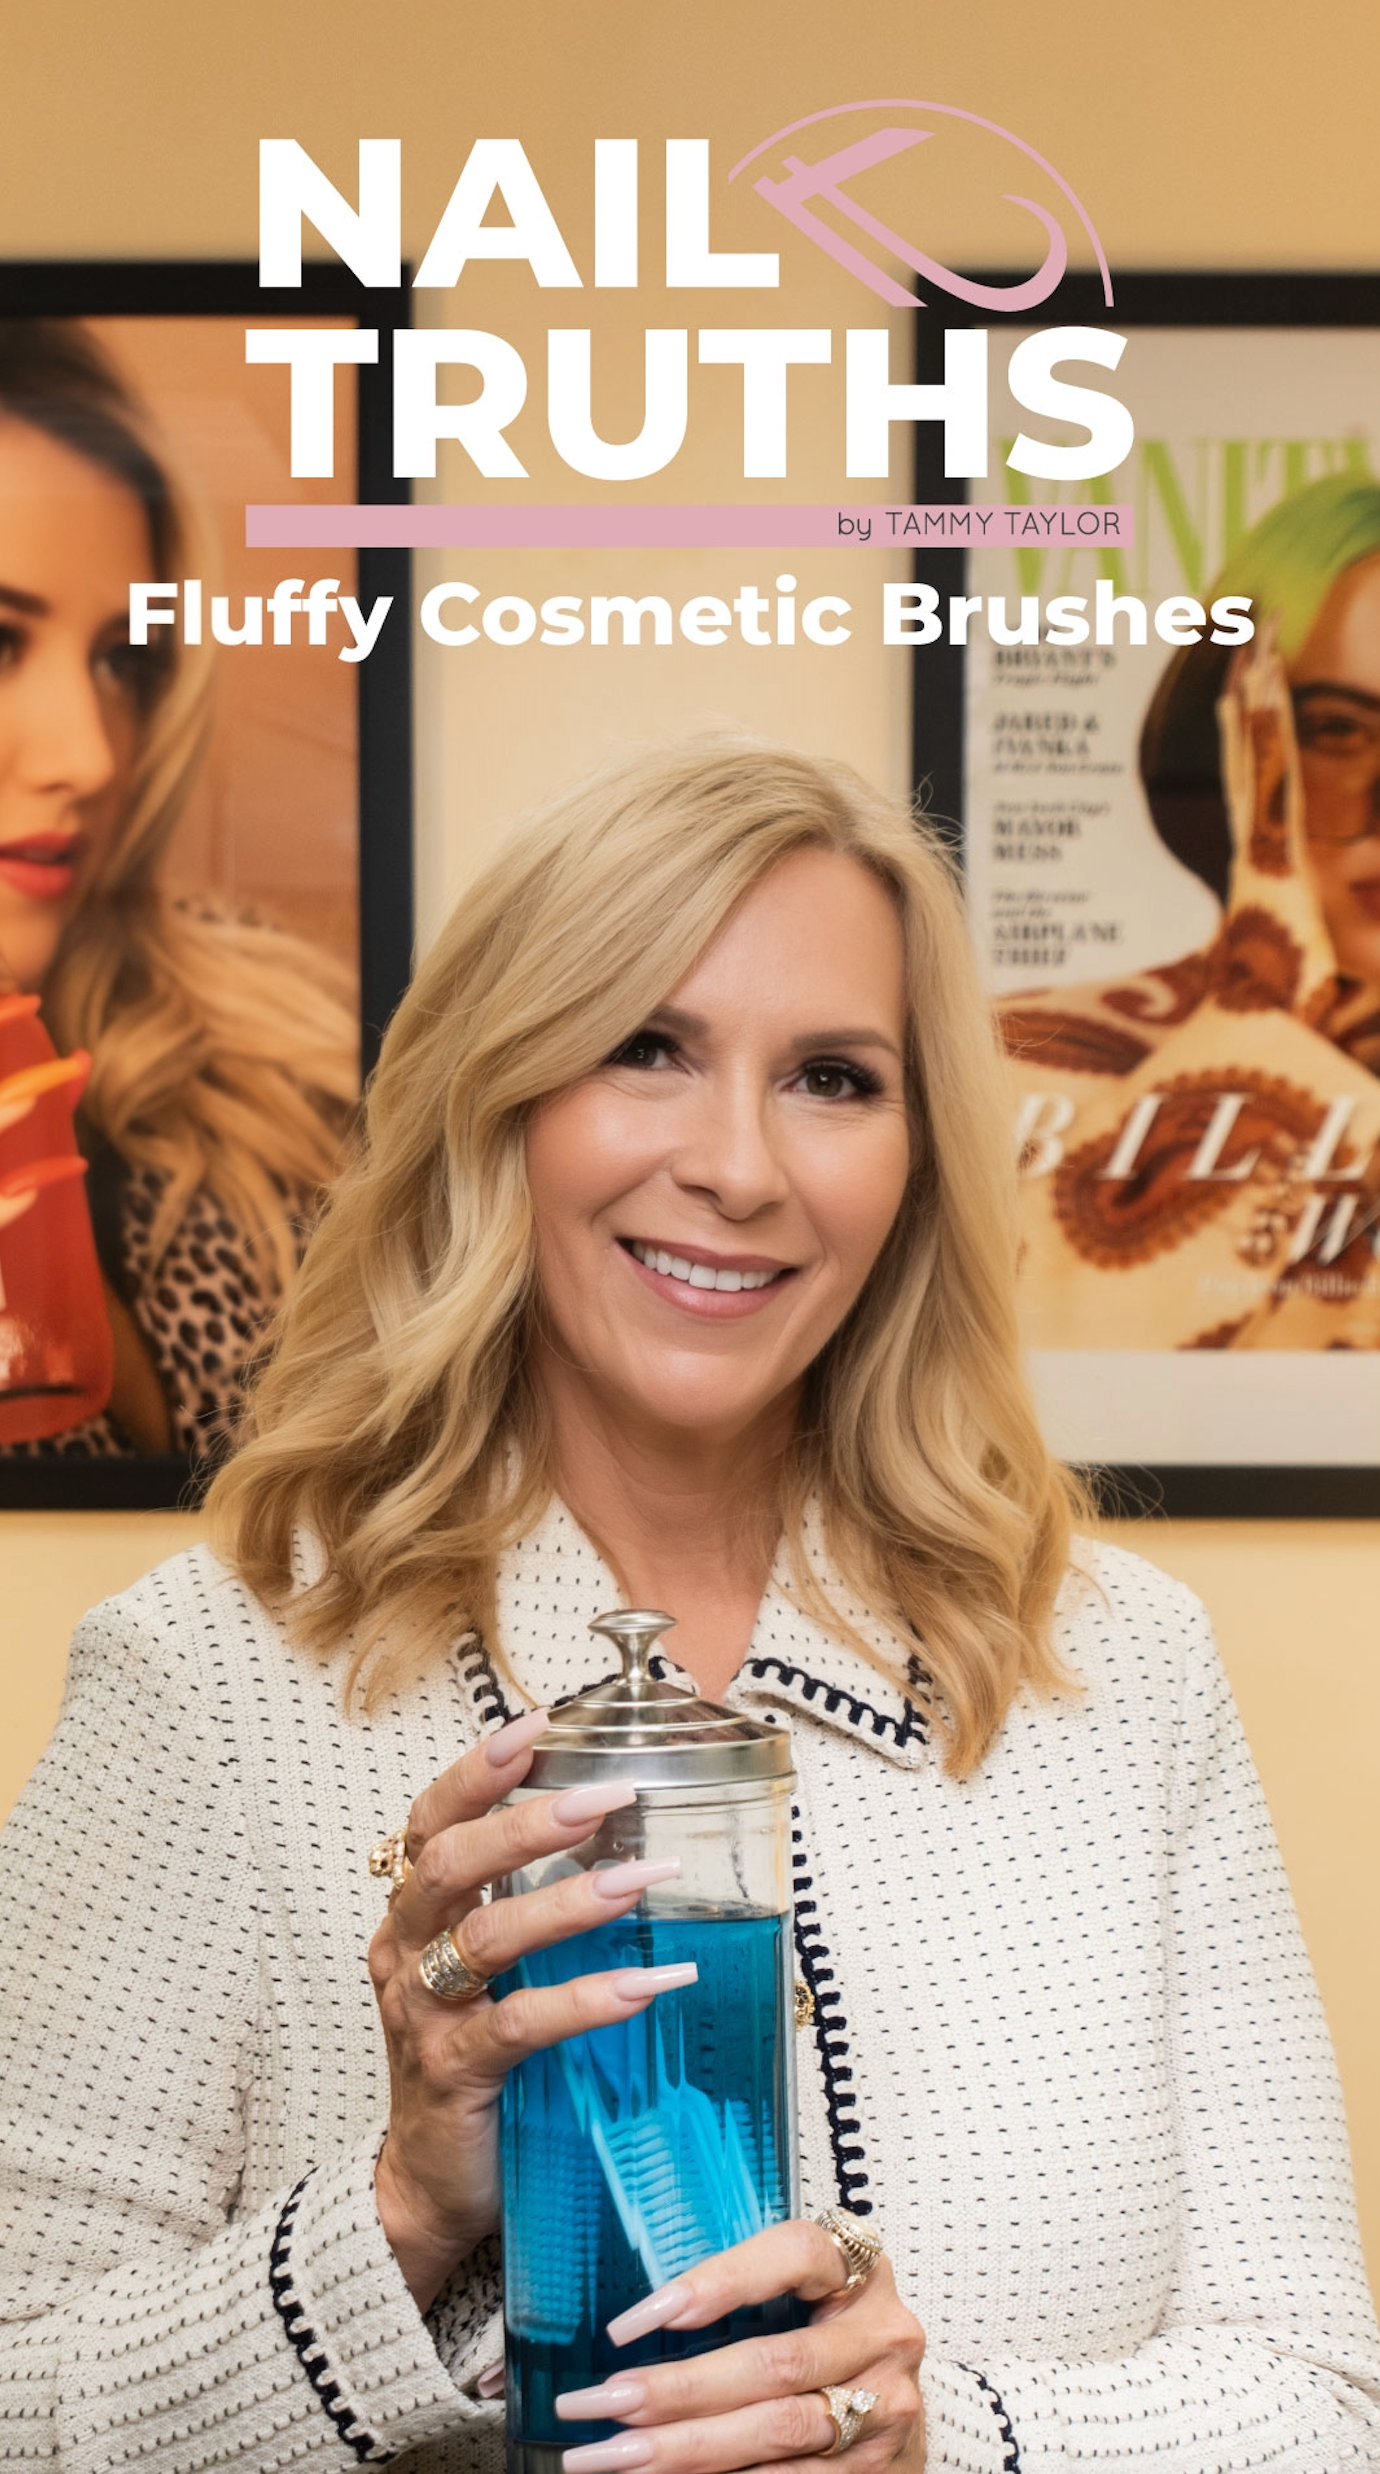 NAIL TRUTHS: Fluffy Cosmetic Brushes